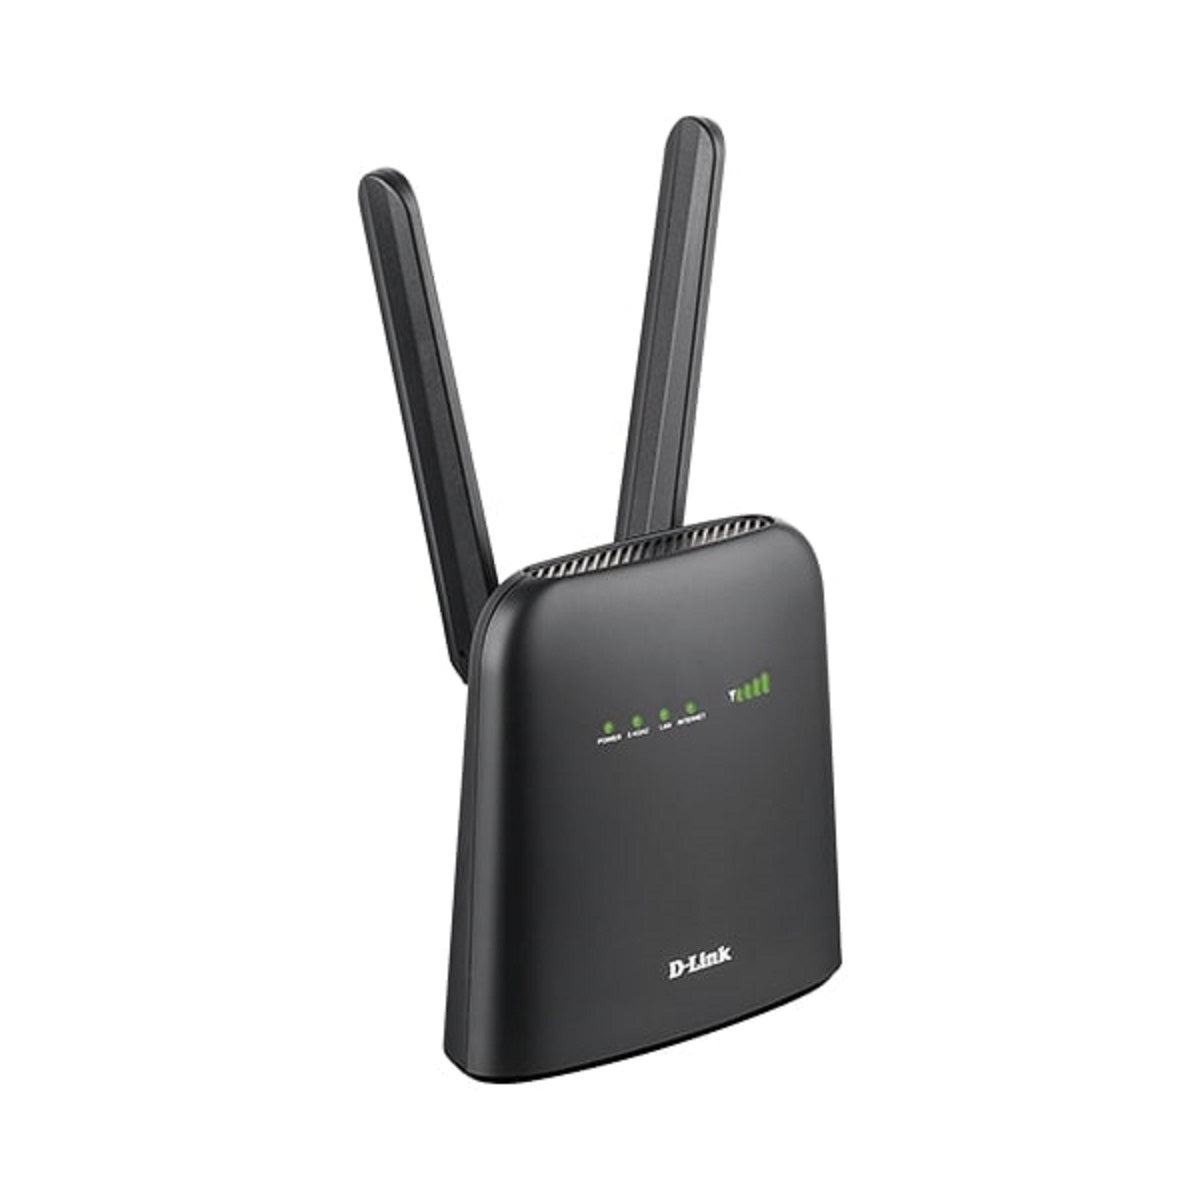 D-Link DWR-920/B 300Mbps WiFi 4 3G/4G WiFi Router